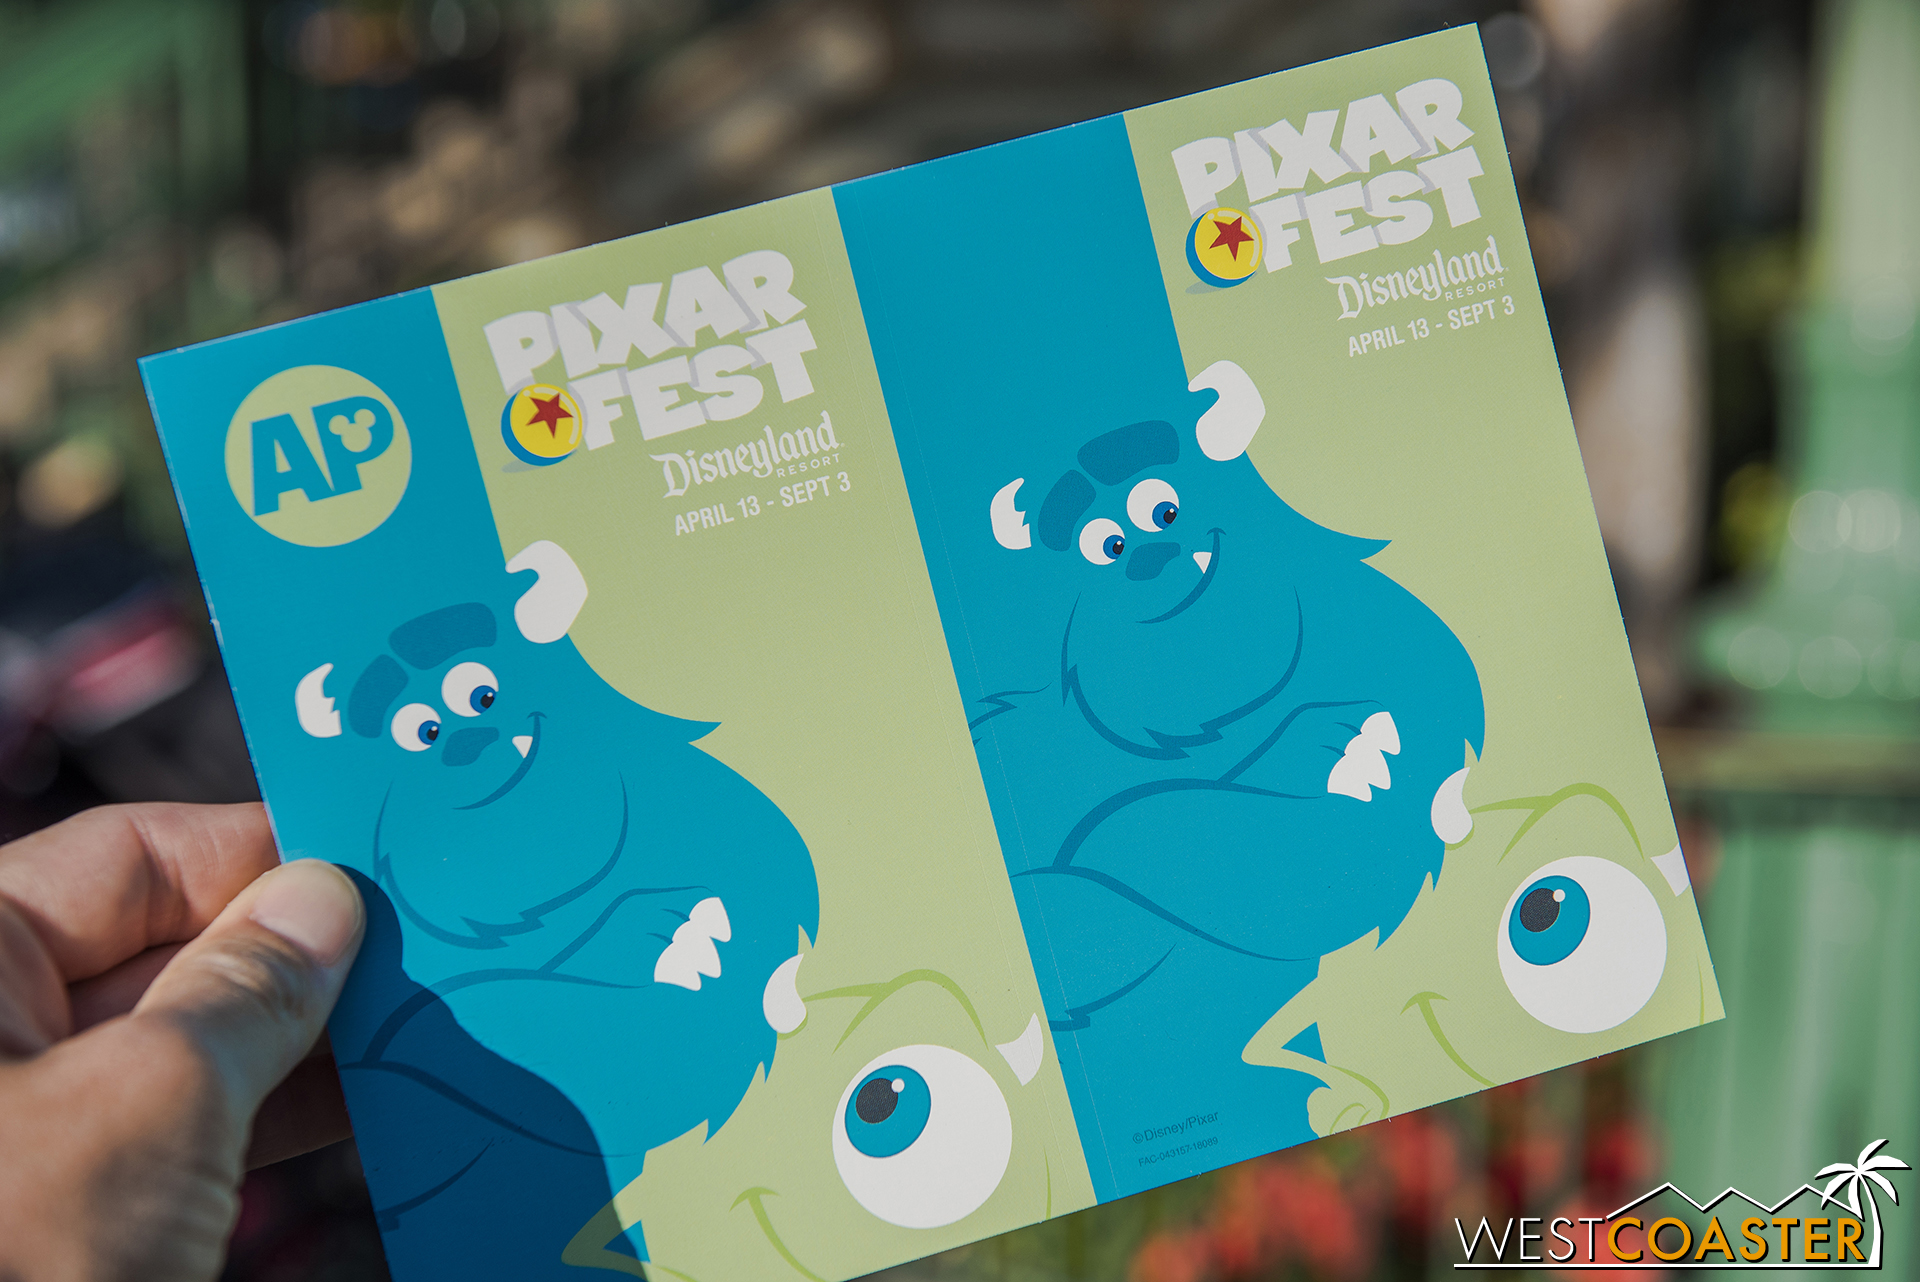  A new decal for Annual Passholders was unveiled last Friday for Pixar Fest.  The decal changes every two weeks throughout the summer. 